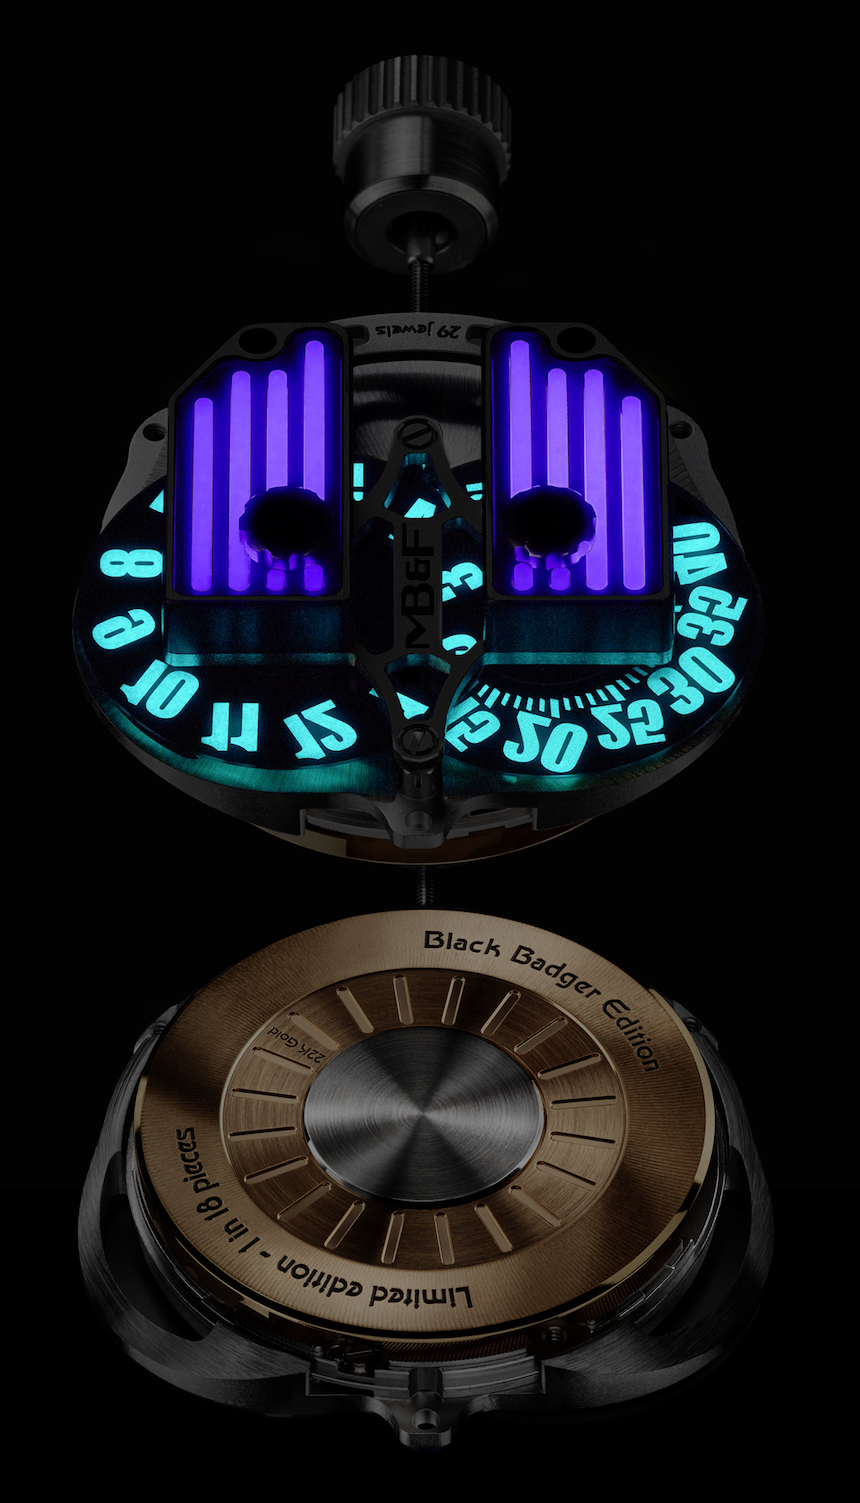 MB&F HMX Watch & StarFleet Machine Black Badger Limited Editions Watch Releases 